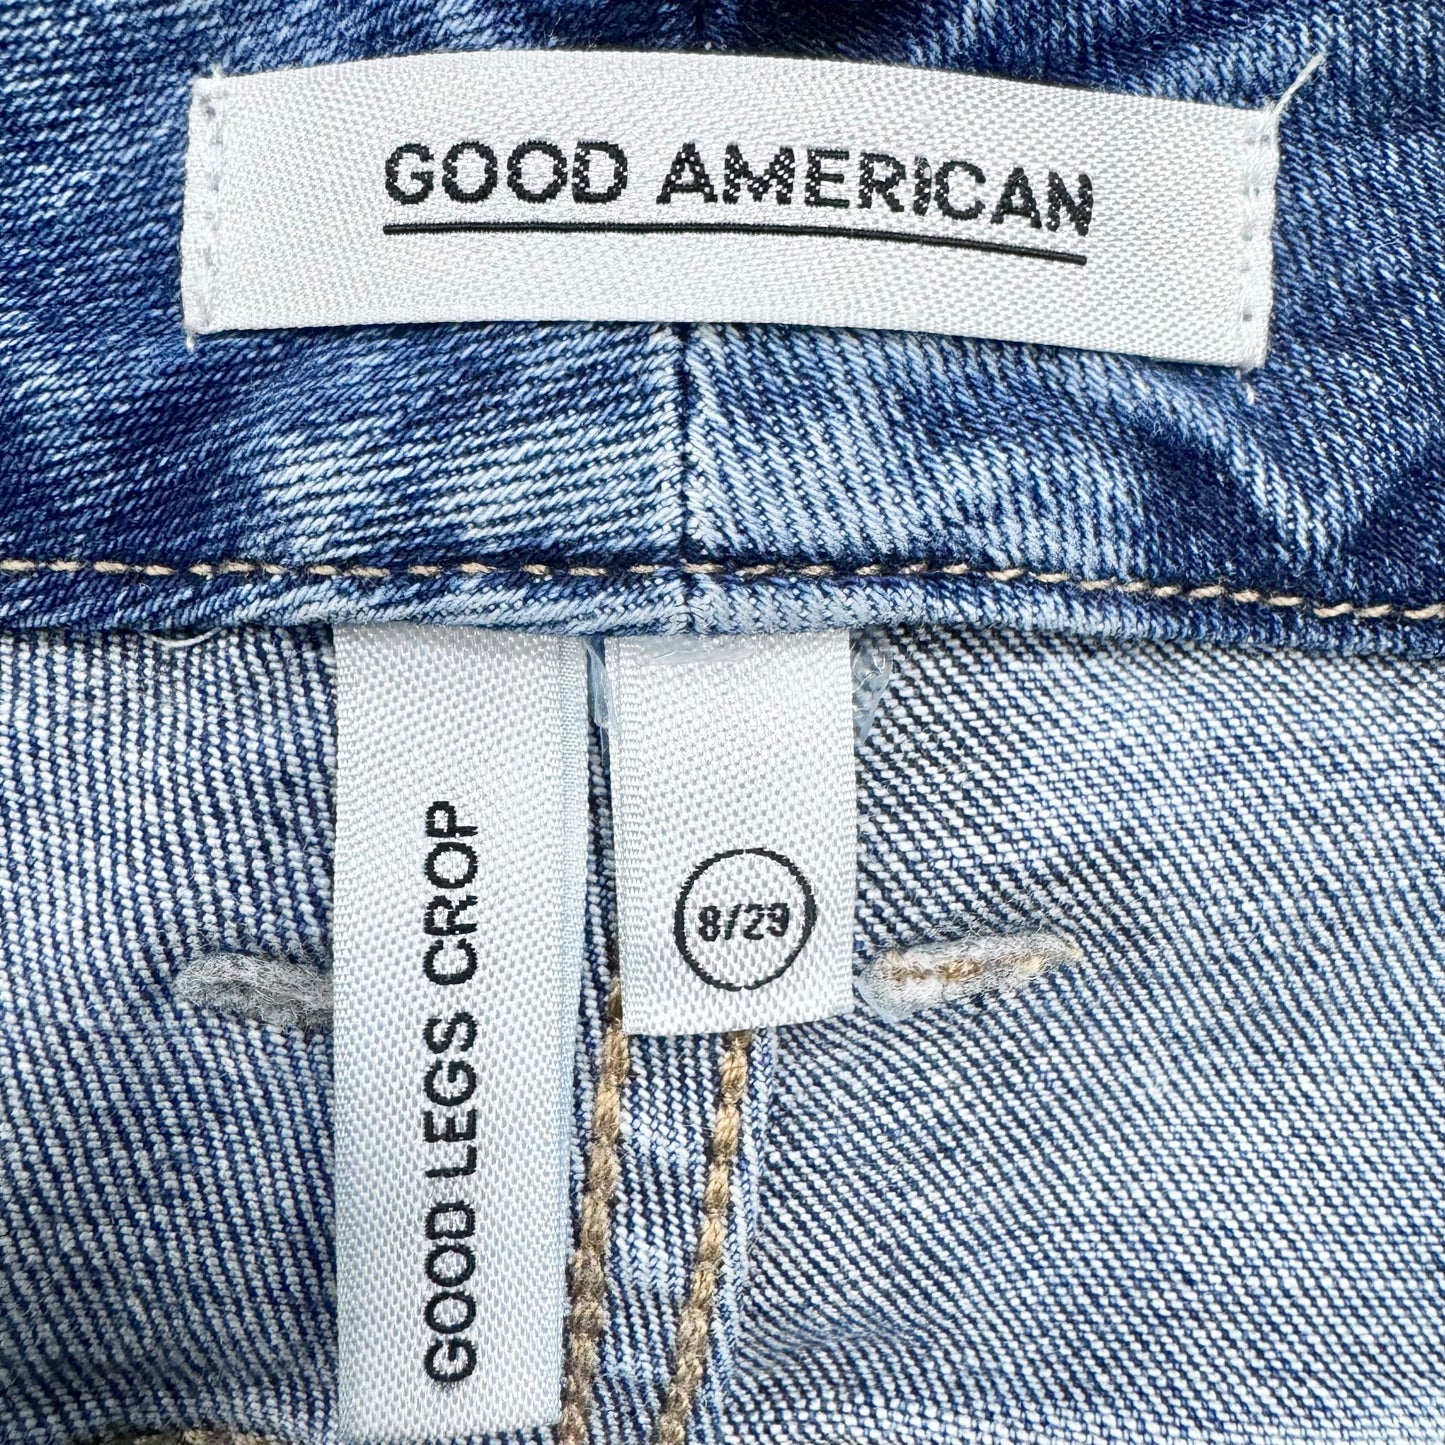 Jeans Skinny By Good American  Size: 8